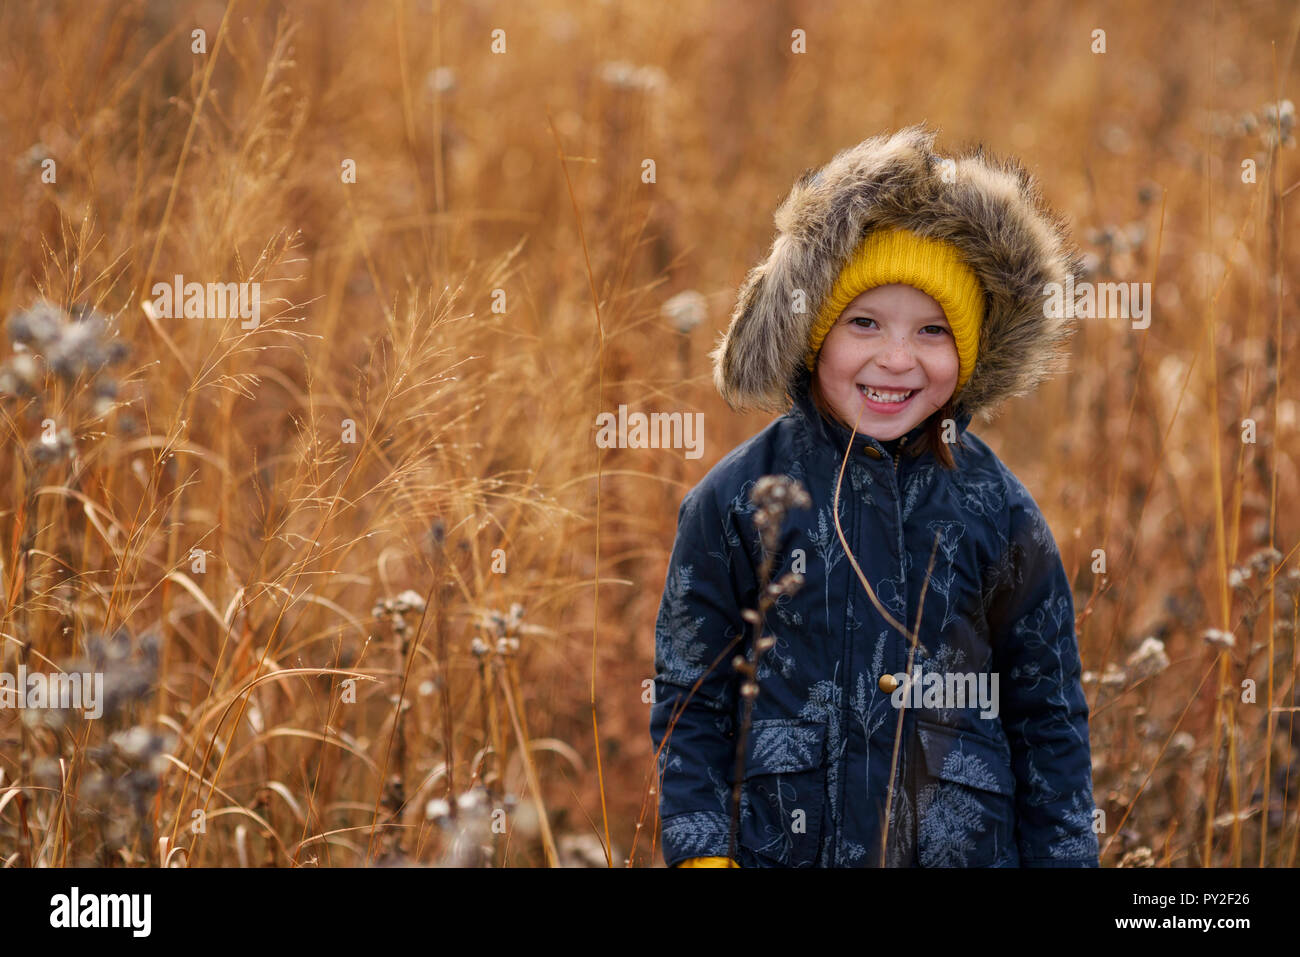 Portrait of a smiling girl standing in a field chewing a piece of long grass, United States Stock Photo